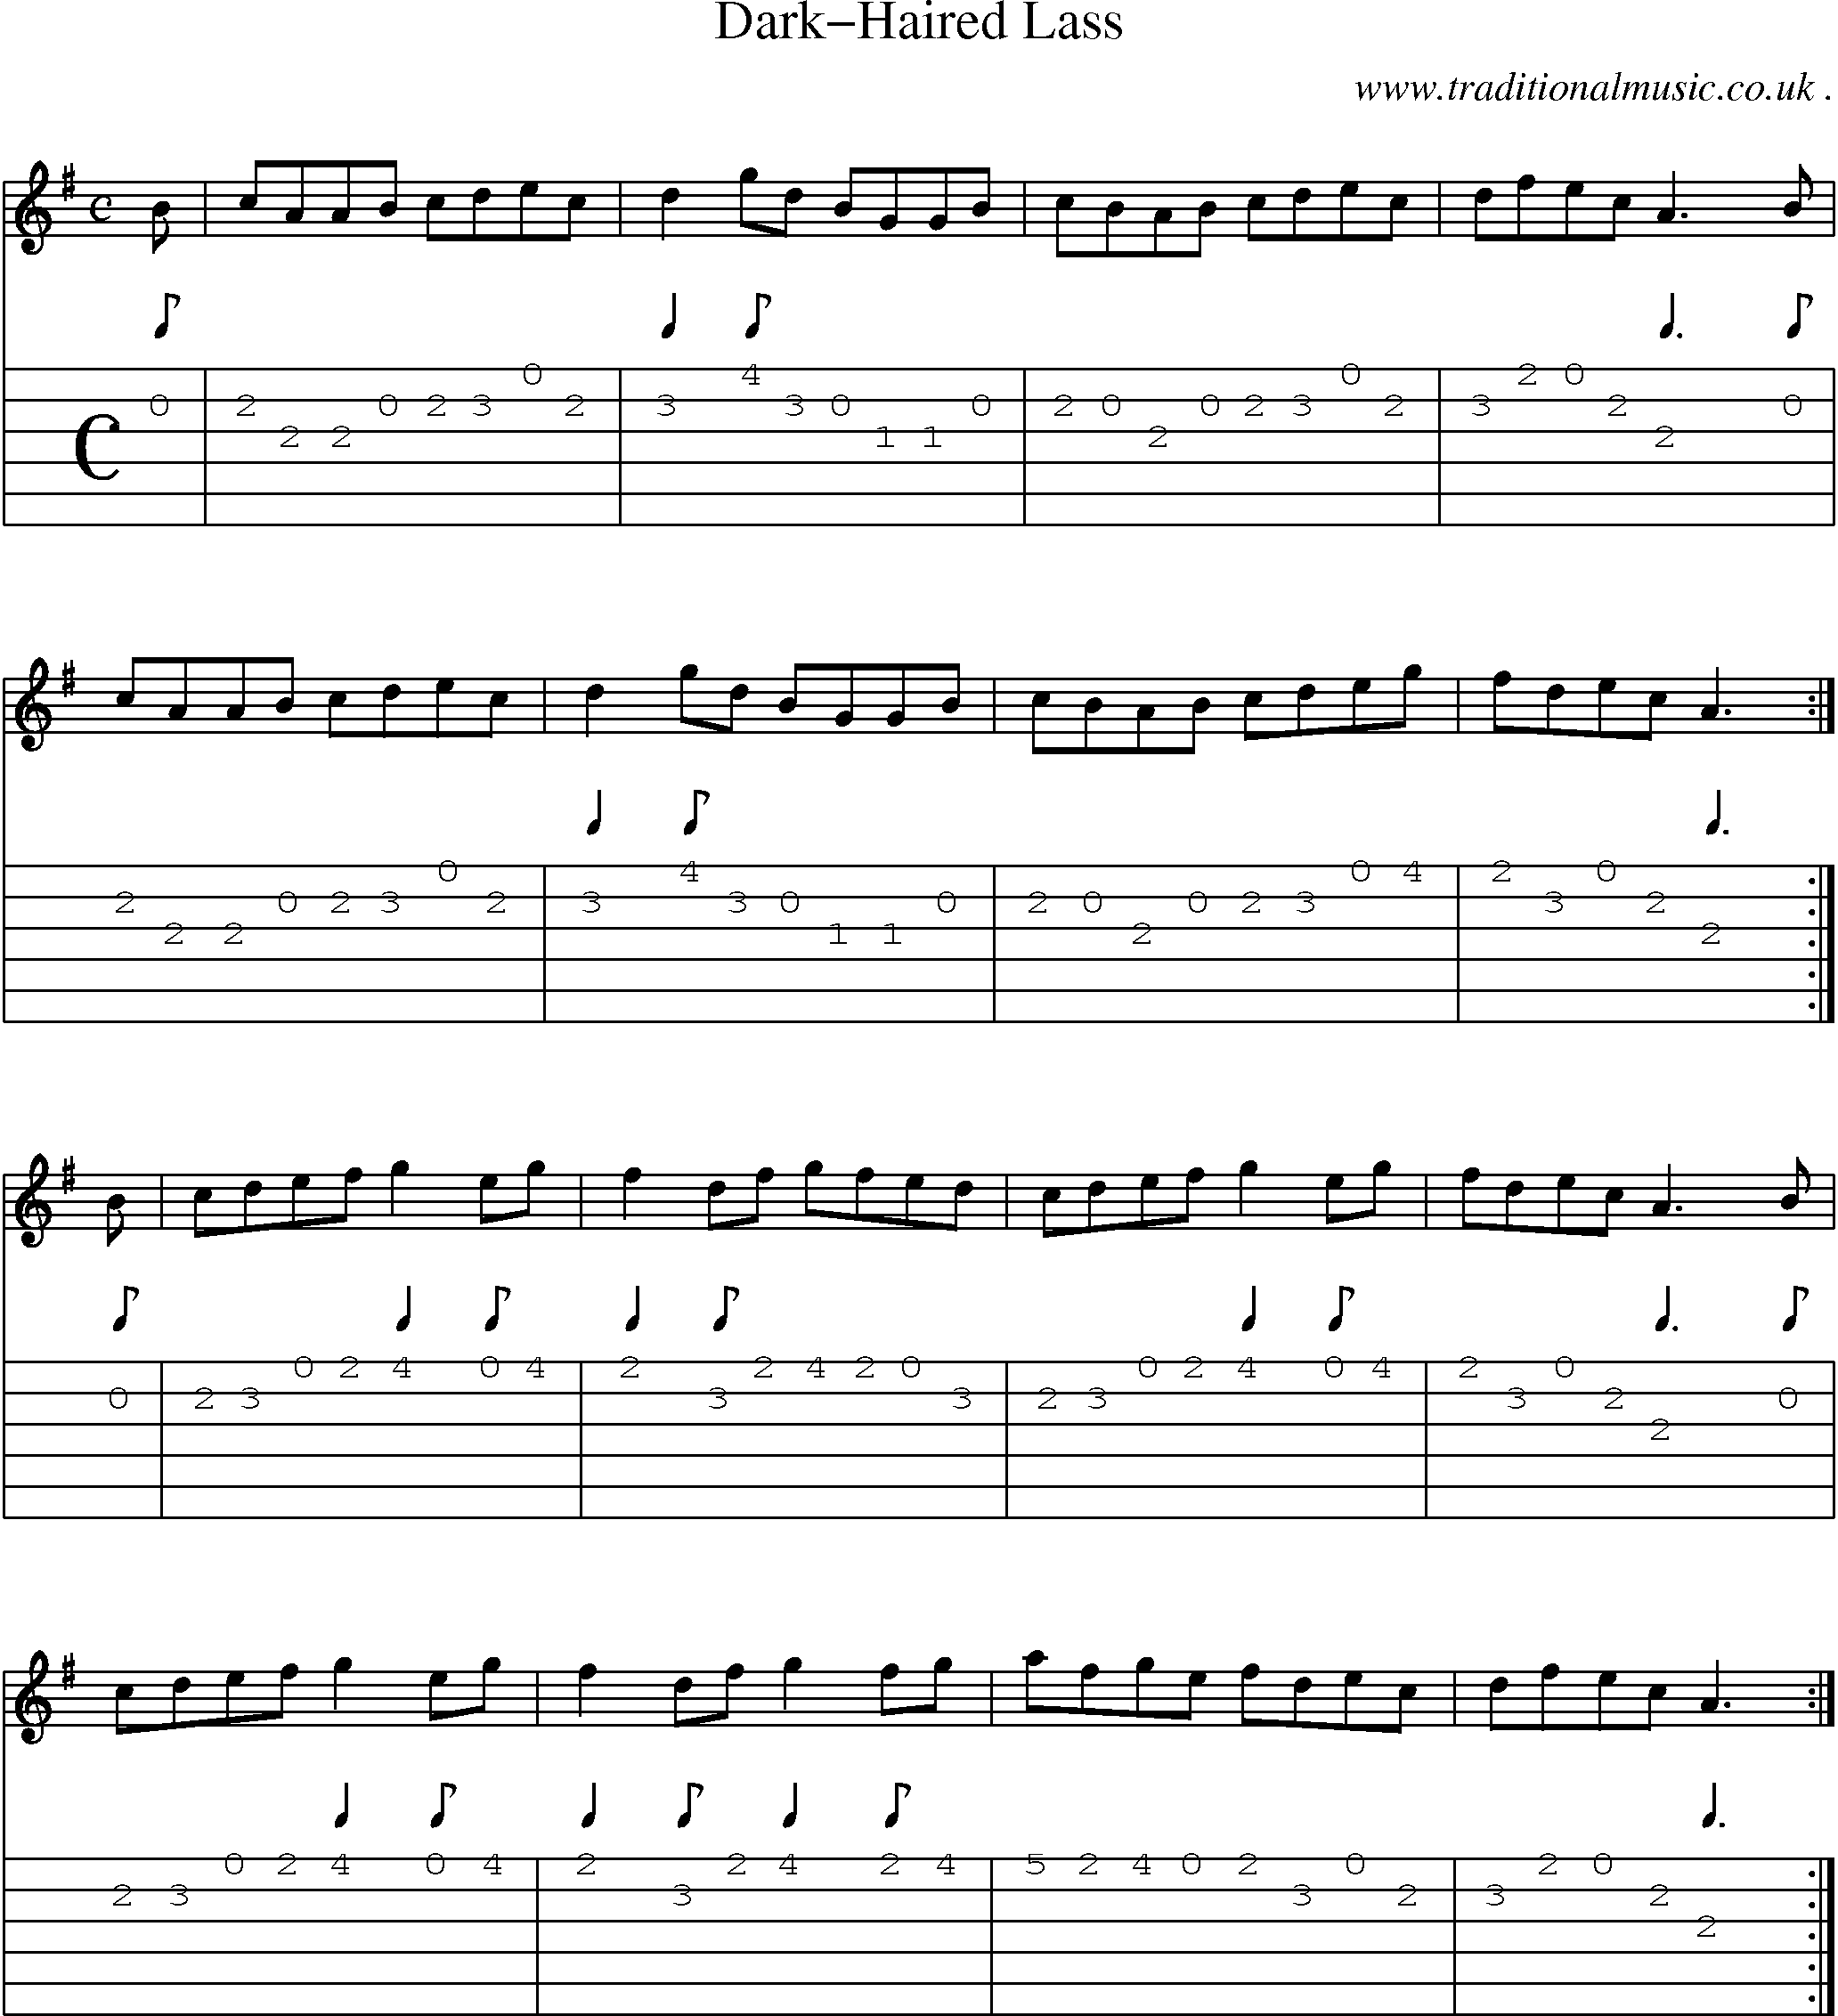 Sheet-Music and Guitar Tabs for Dark-haired Lass